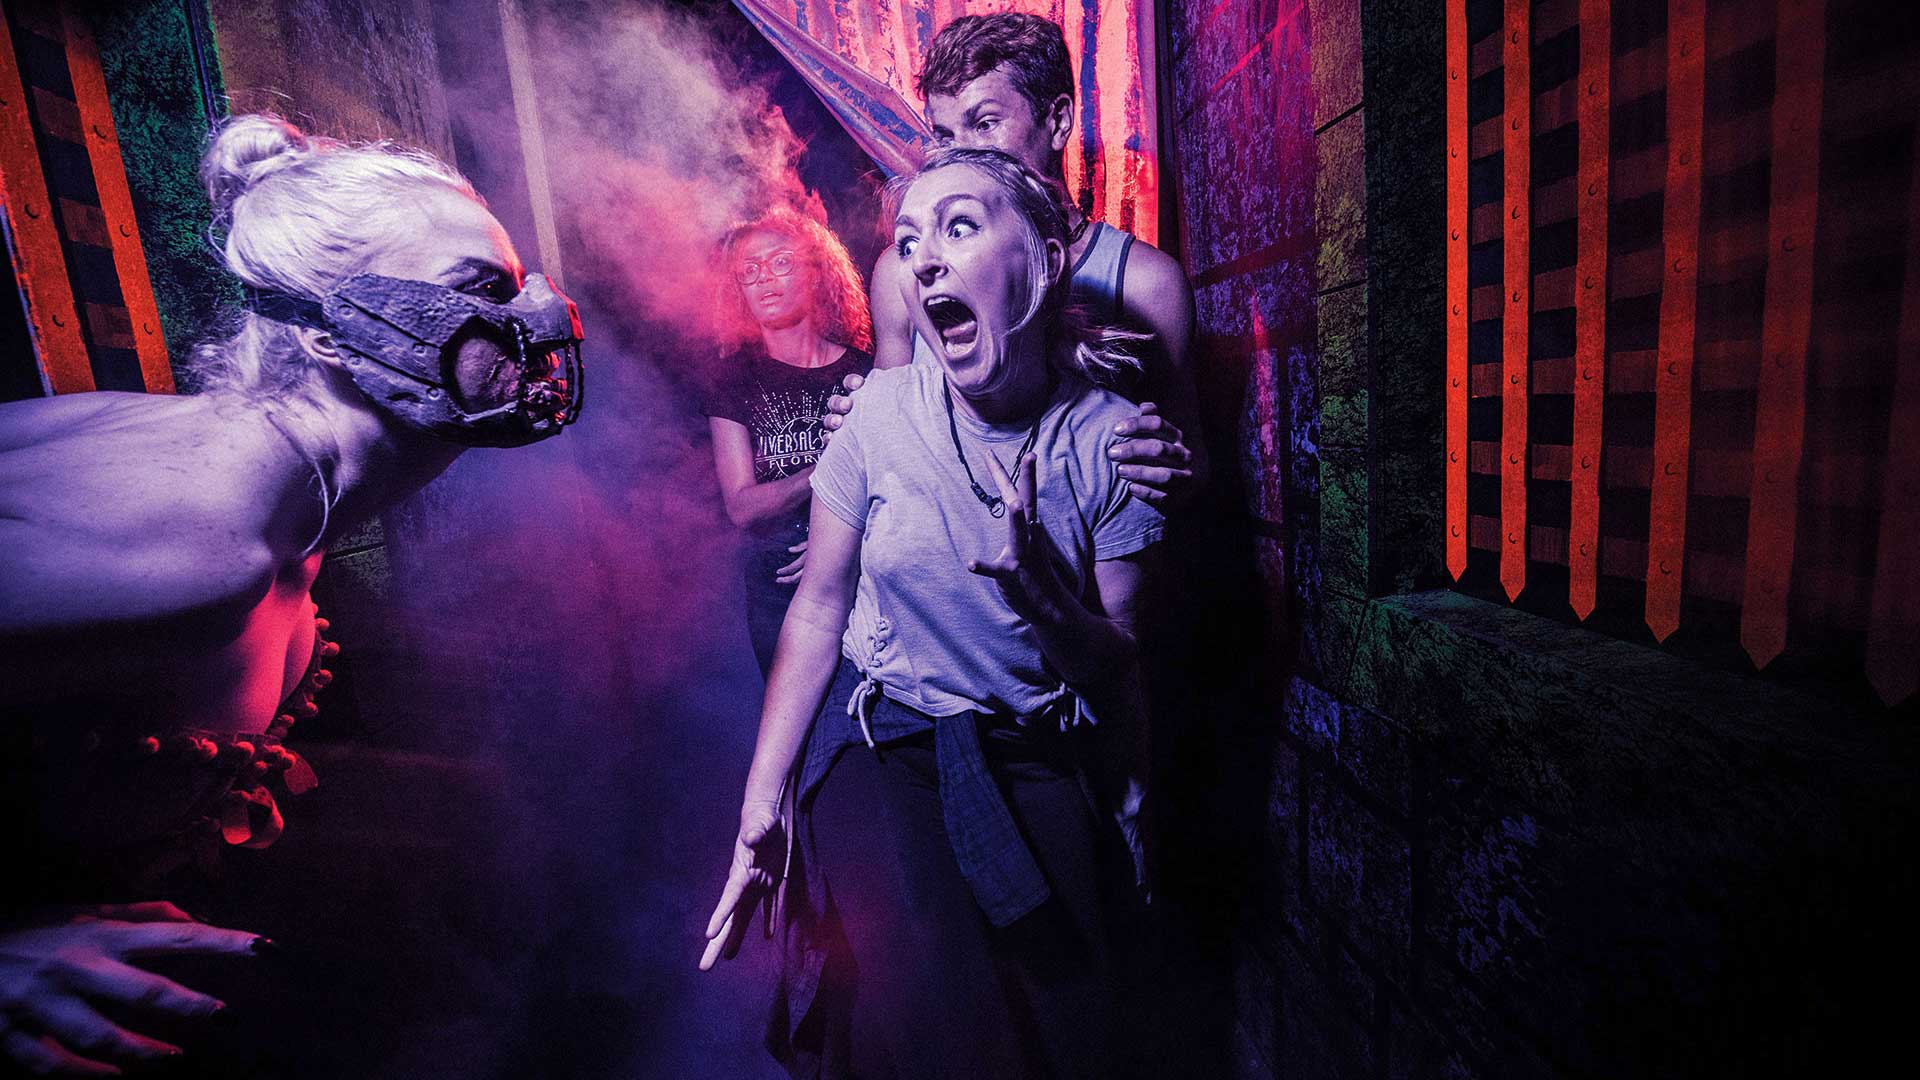 Guests scream during a haunted house visit.